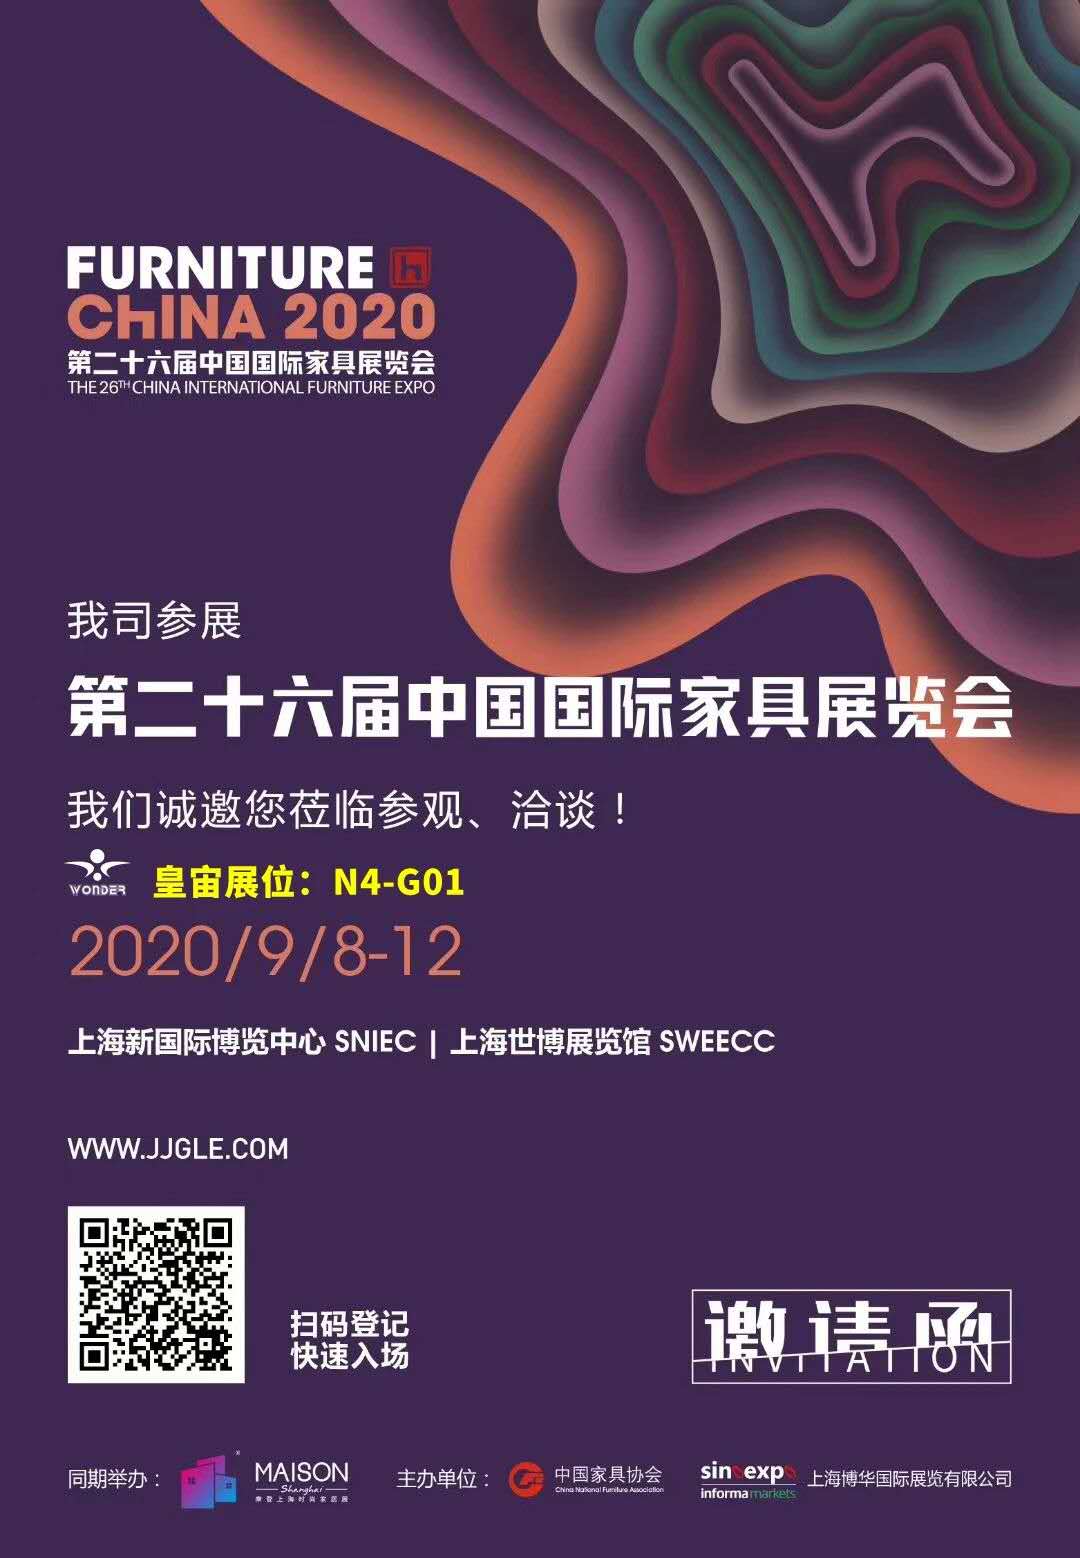 The 26th China International Furniture Expo!